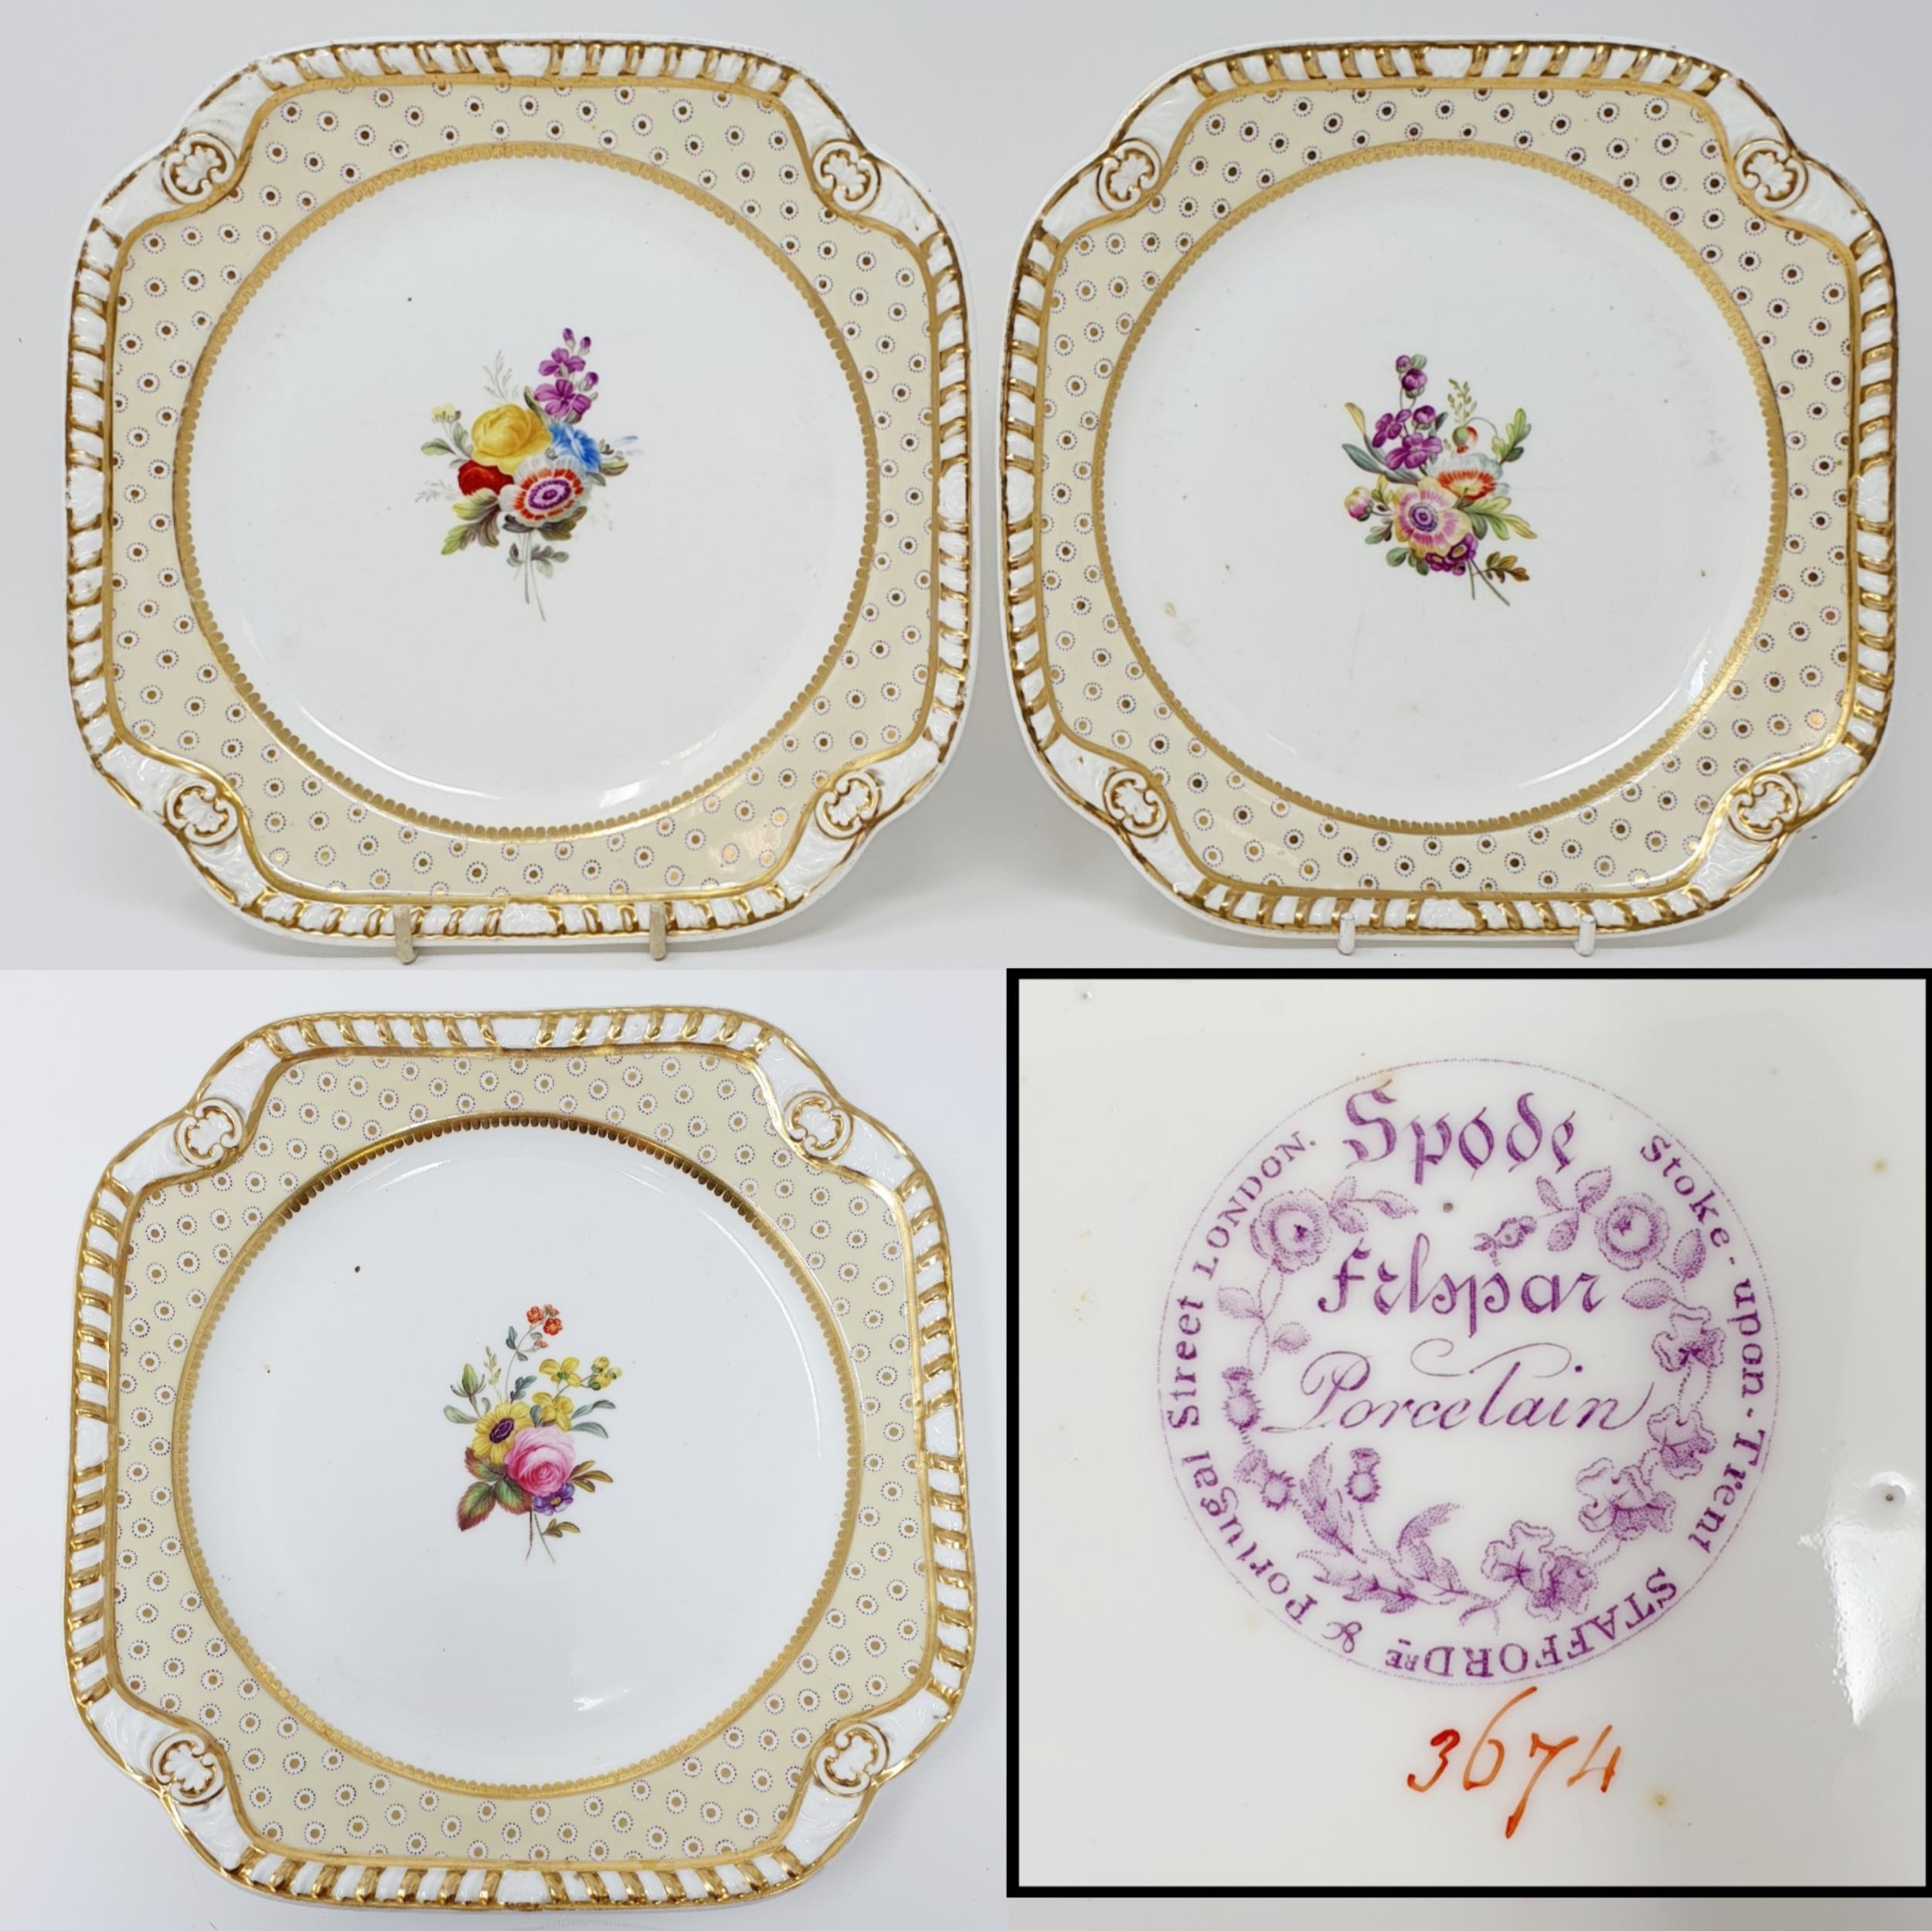 A 19th century Spode part dessert service, with a yellow border, centre decorated flowers, - Image 9 of 9